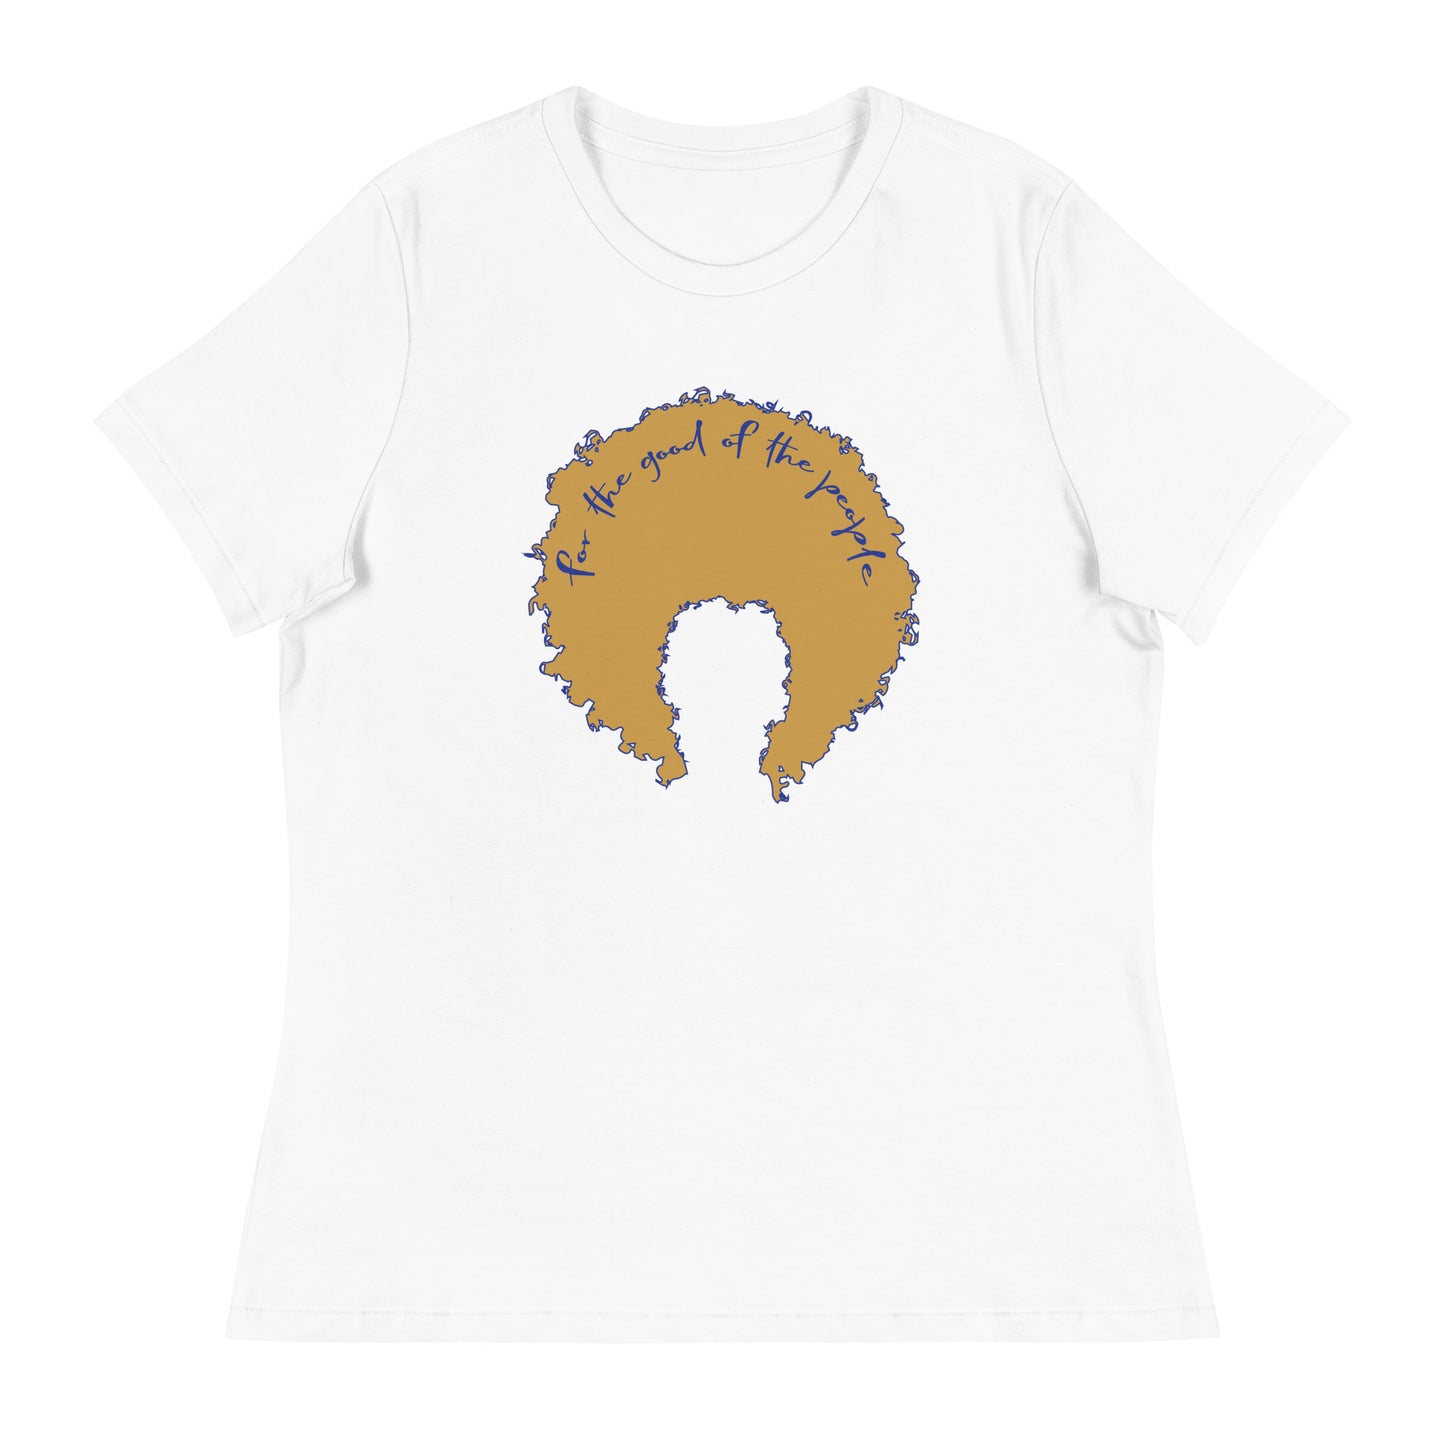 White women's tee with gold afro graphic trimmed in blue with for the good of the people in pink on the inside top of the afro.